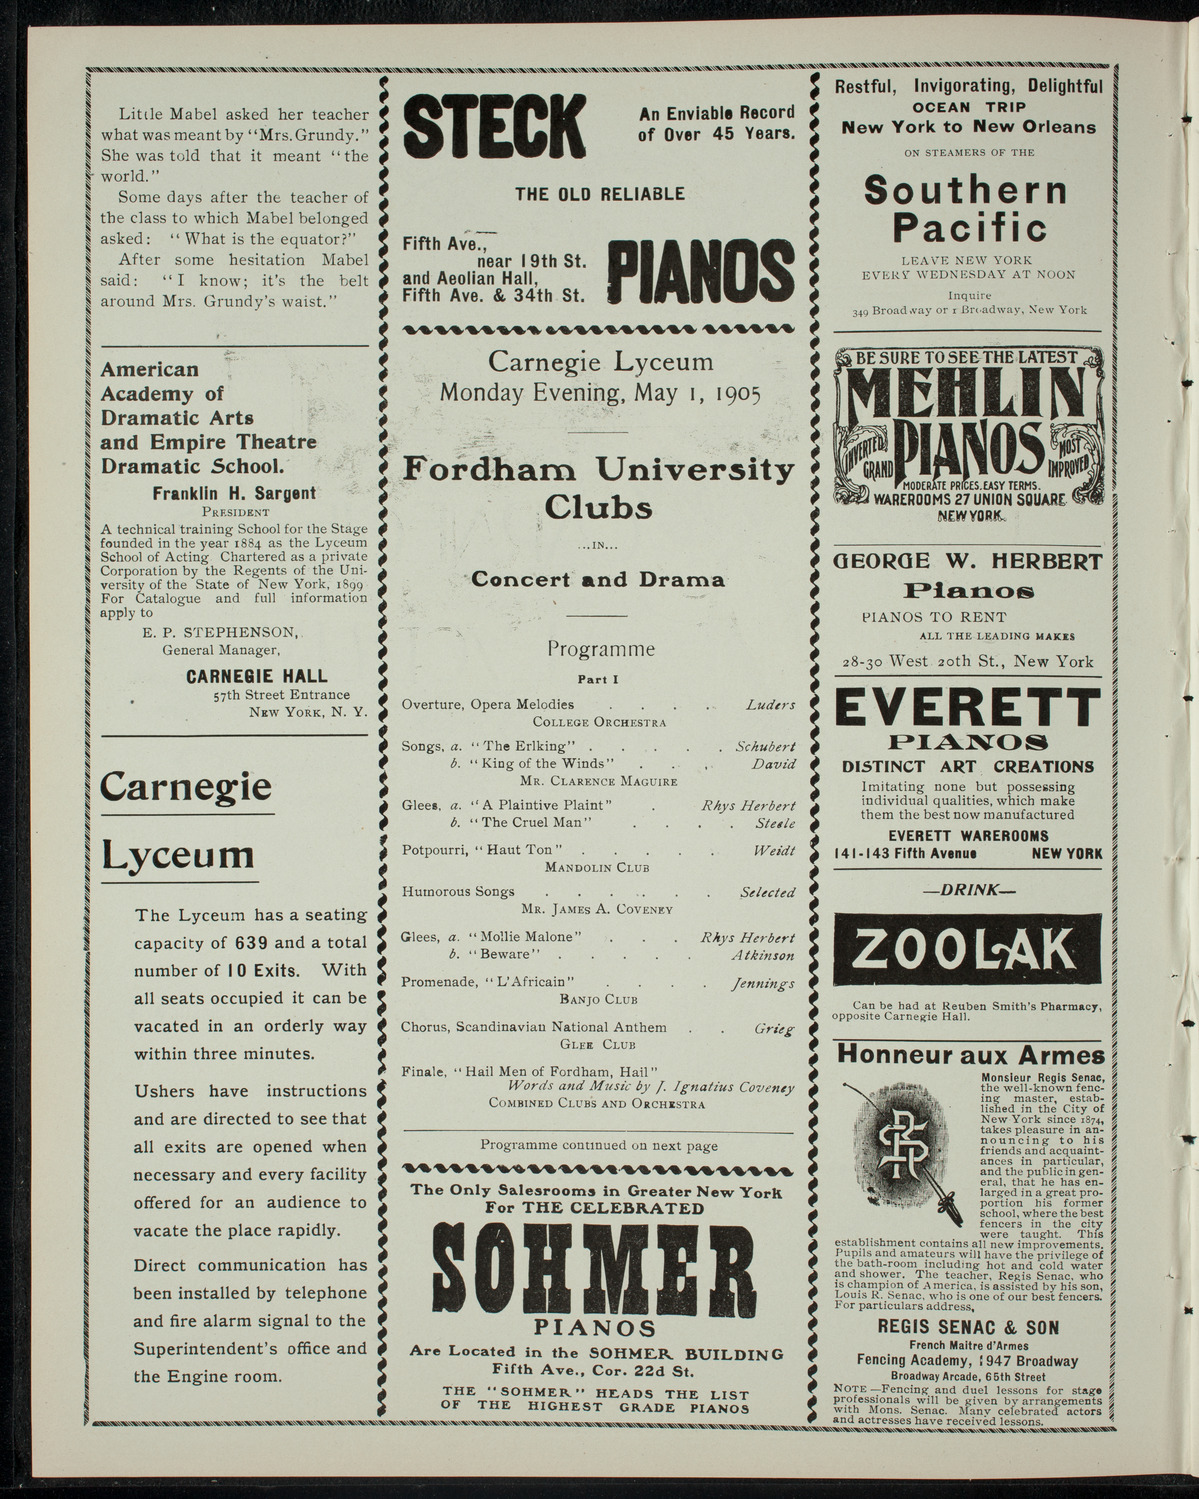 Fordham University Musical and Drama Clubs, May 1, 1905, program page 2